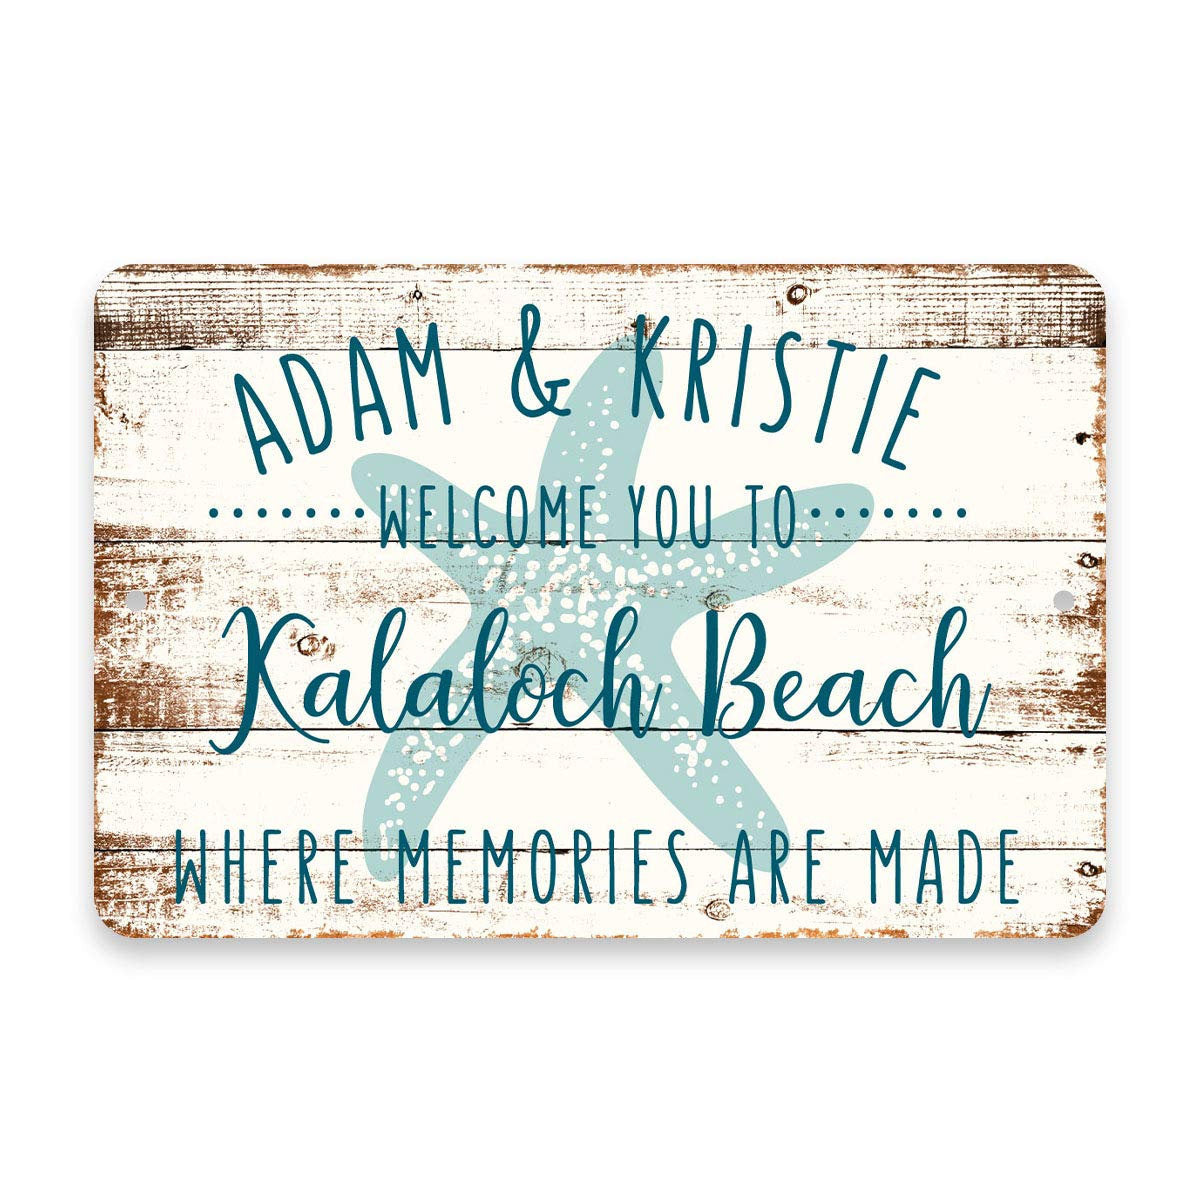 Personalized Welcome to Kalaloch Beach Where Memories are Made Sign - 8 X 12 Metal Sign with Wood Look